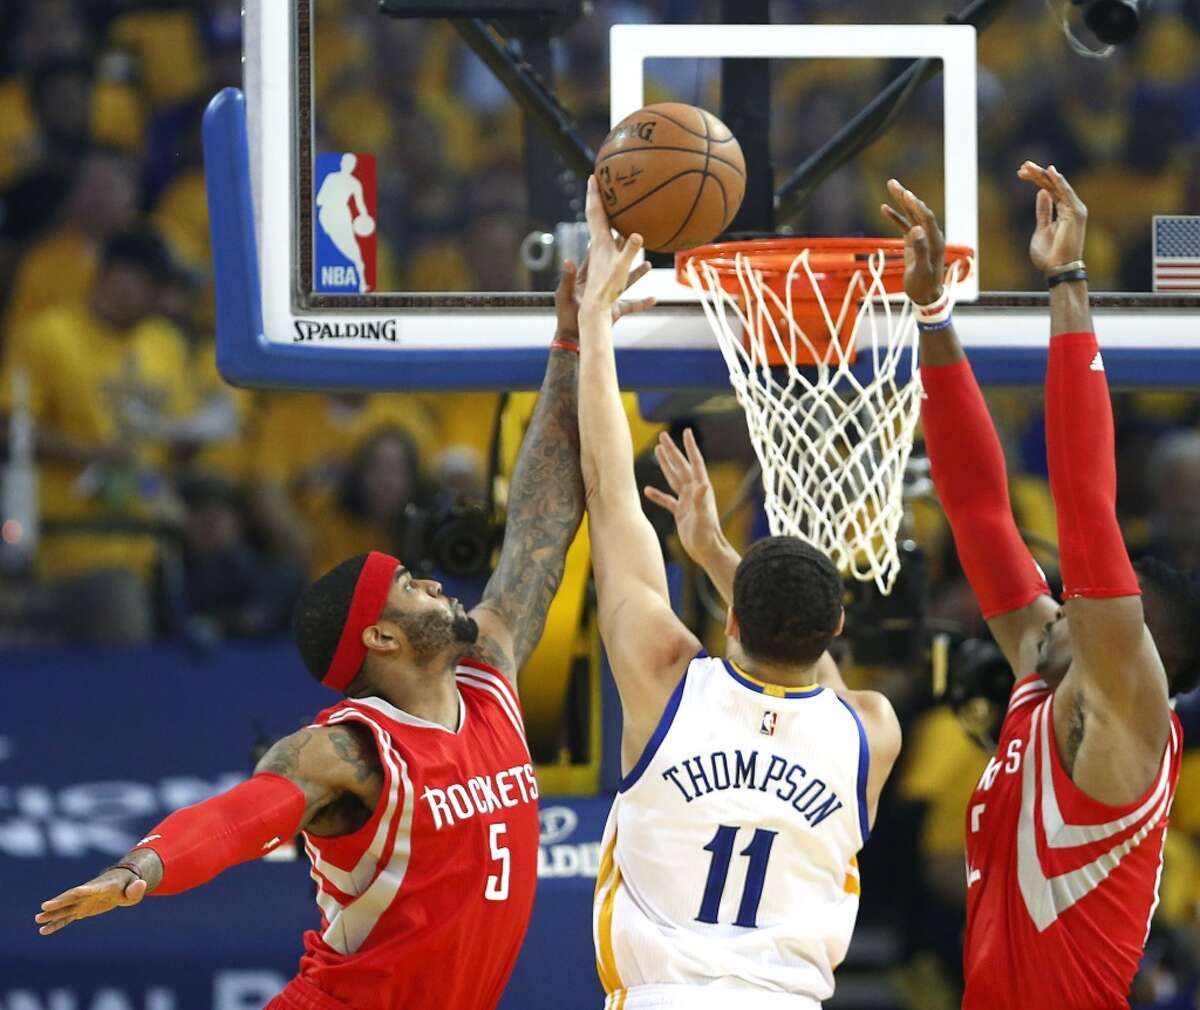 Houston Rockets forward Josh Smith (5) and center Dwight Howard (12) defend a shot by Golden State Warriors guard Klay Thompson (11) in the first period of Game 1 of the NBA Western Conference Finals at Oracle Arena on Tuesday, May 19, 2015, in Oakland. ( James Nielsen / Houston Chronicle )